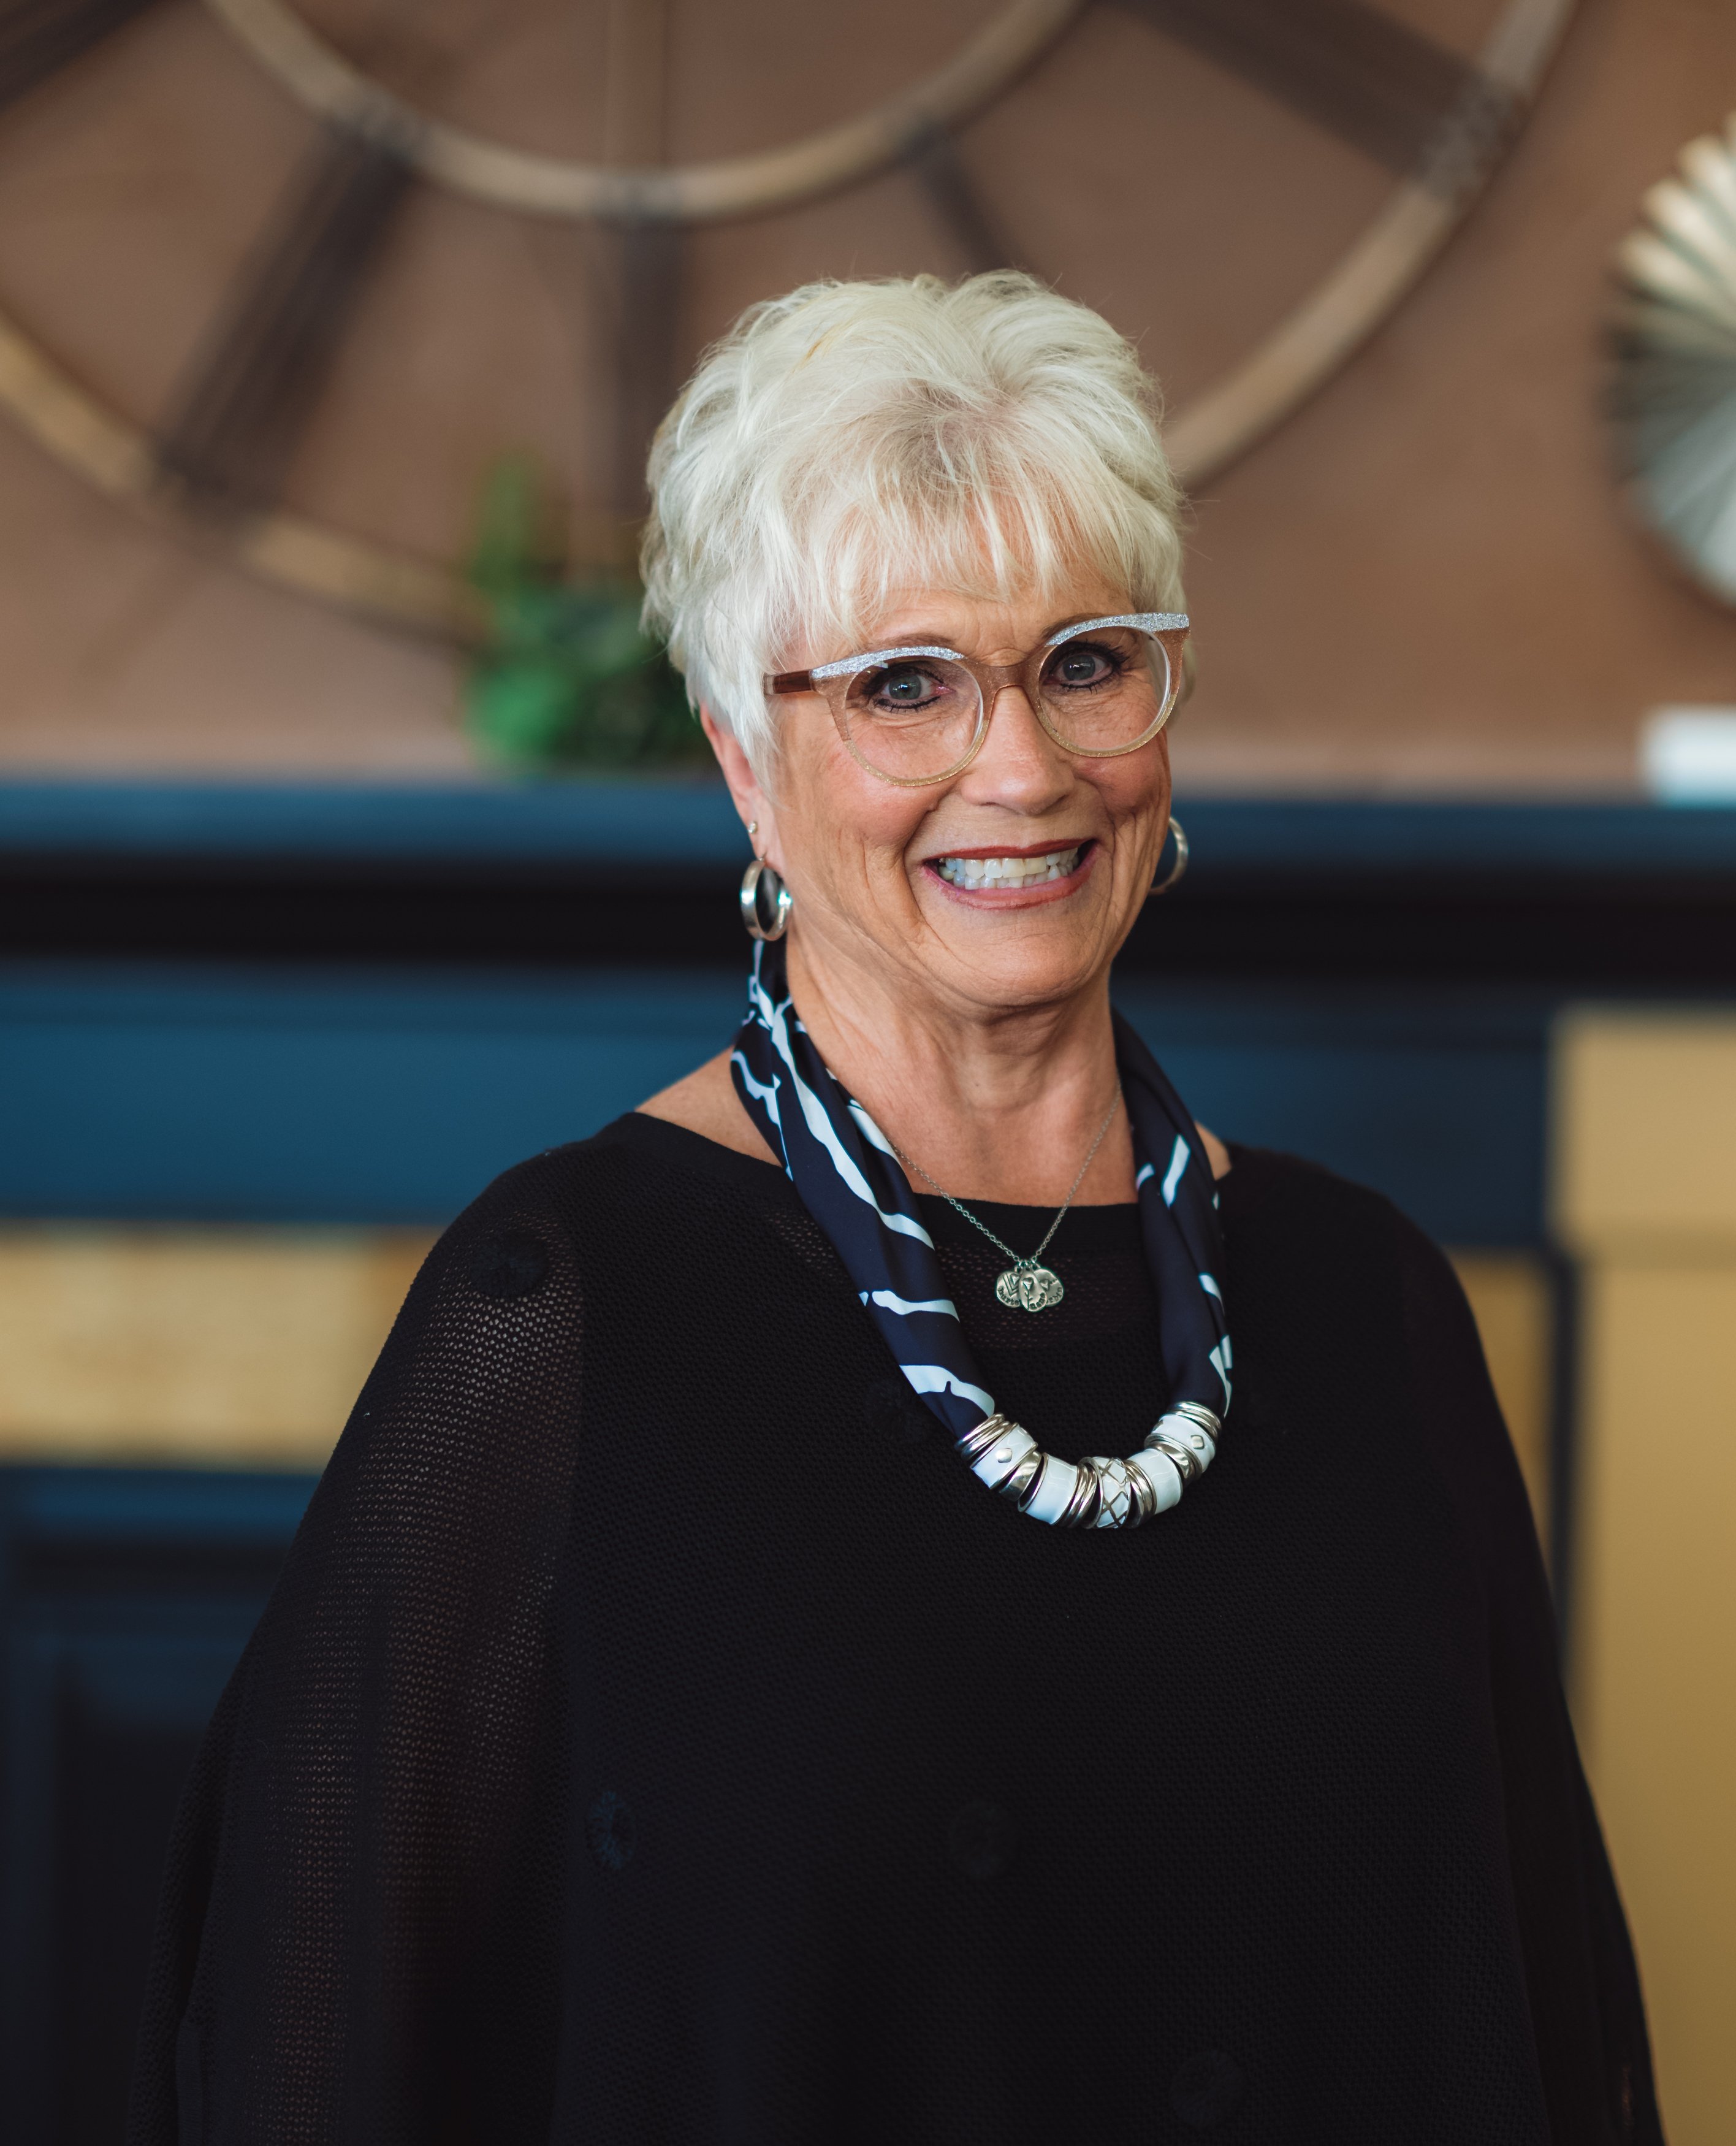 Deb, Co-Owner, has been in business management for more than 35 years. Having many years of experience, she is vital to keeping the business running smoothly. Customer service and satisfaction is what Deb is all about.